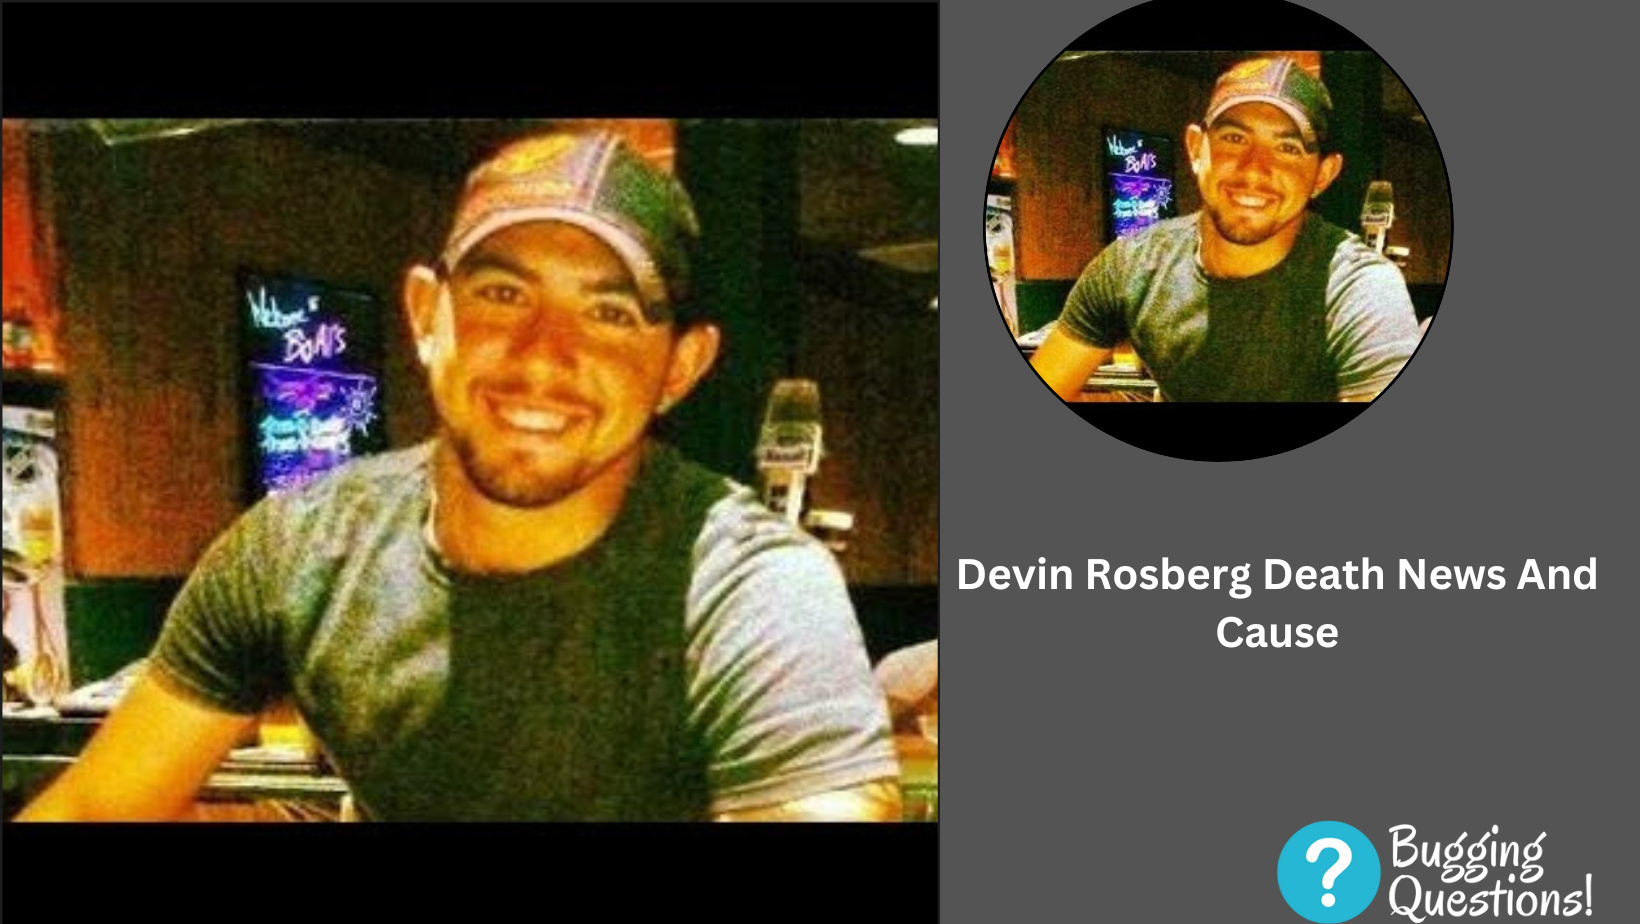 Devin Rosberg Death News And Cause